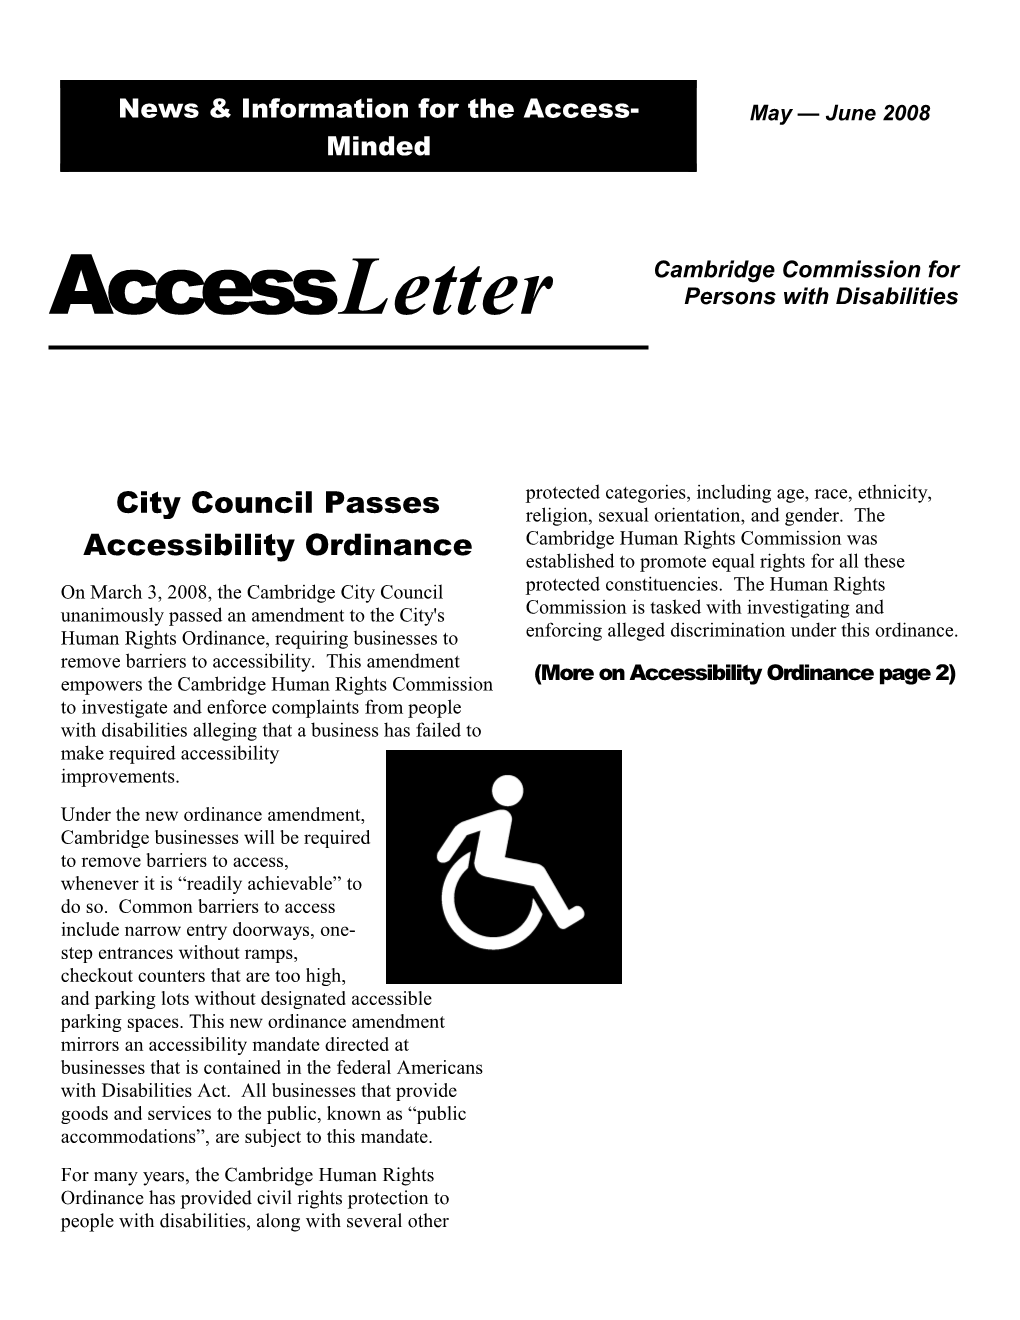 News & Information for the Access-Minded s1